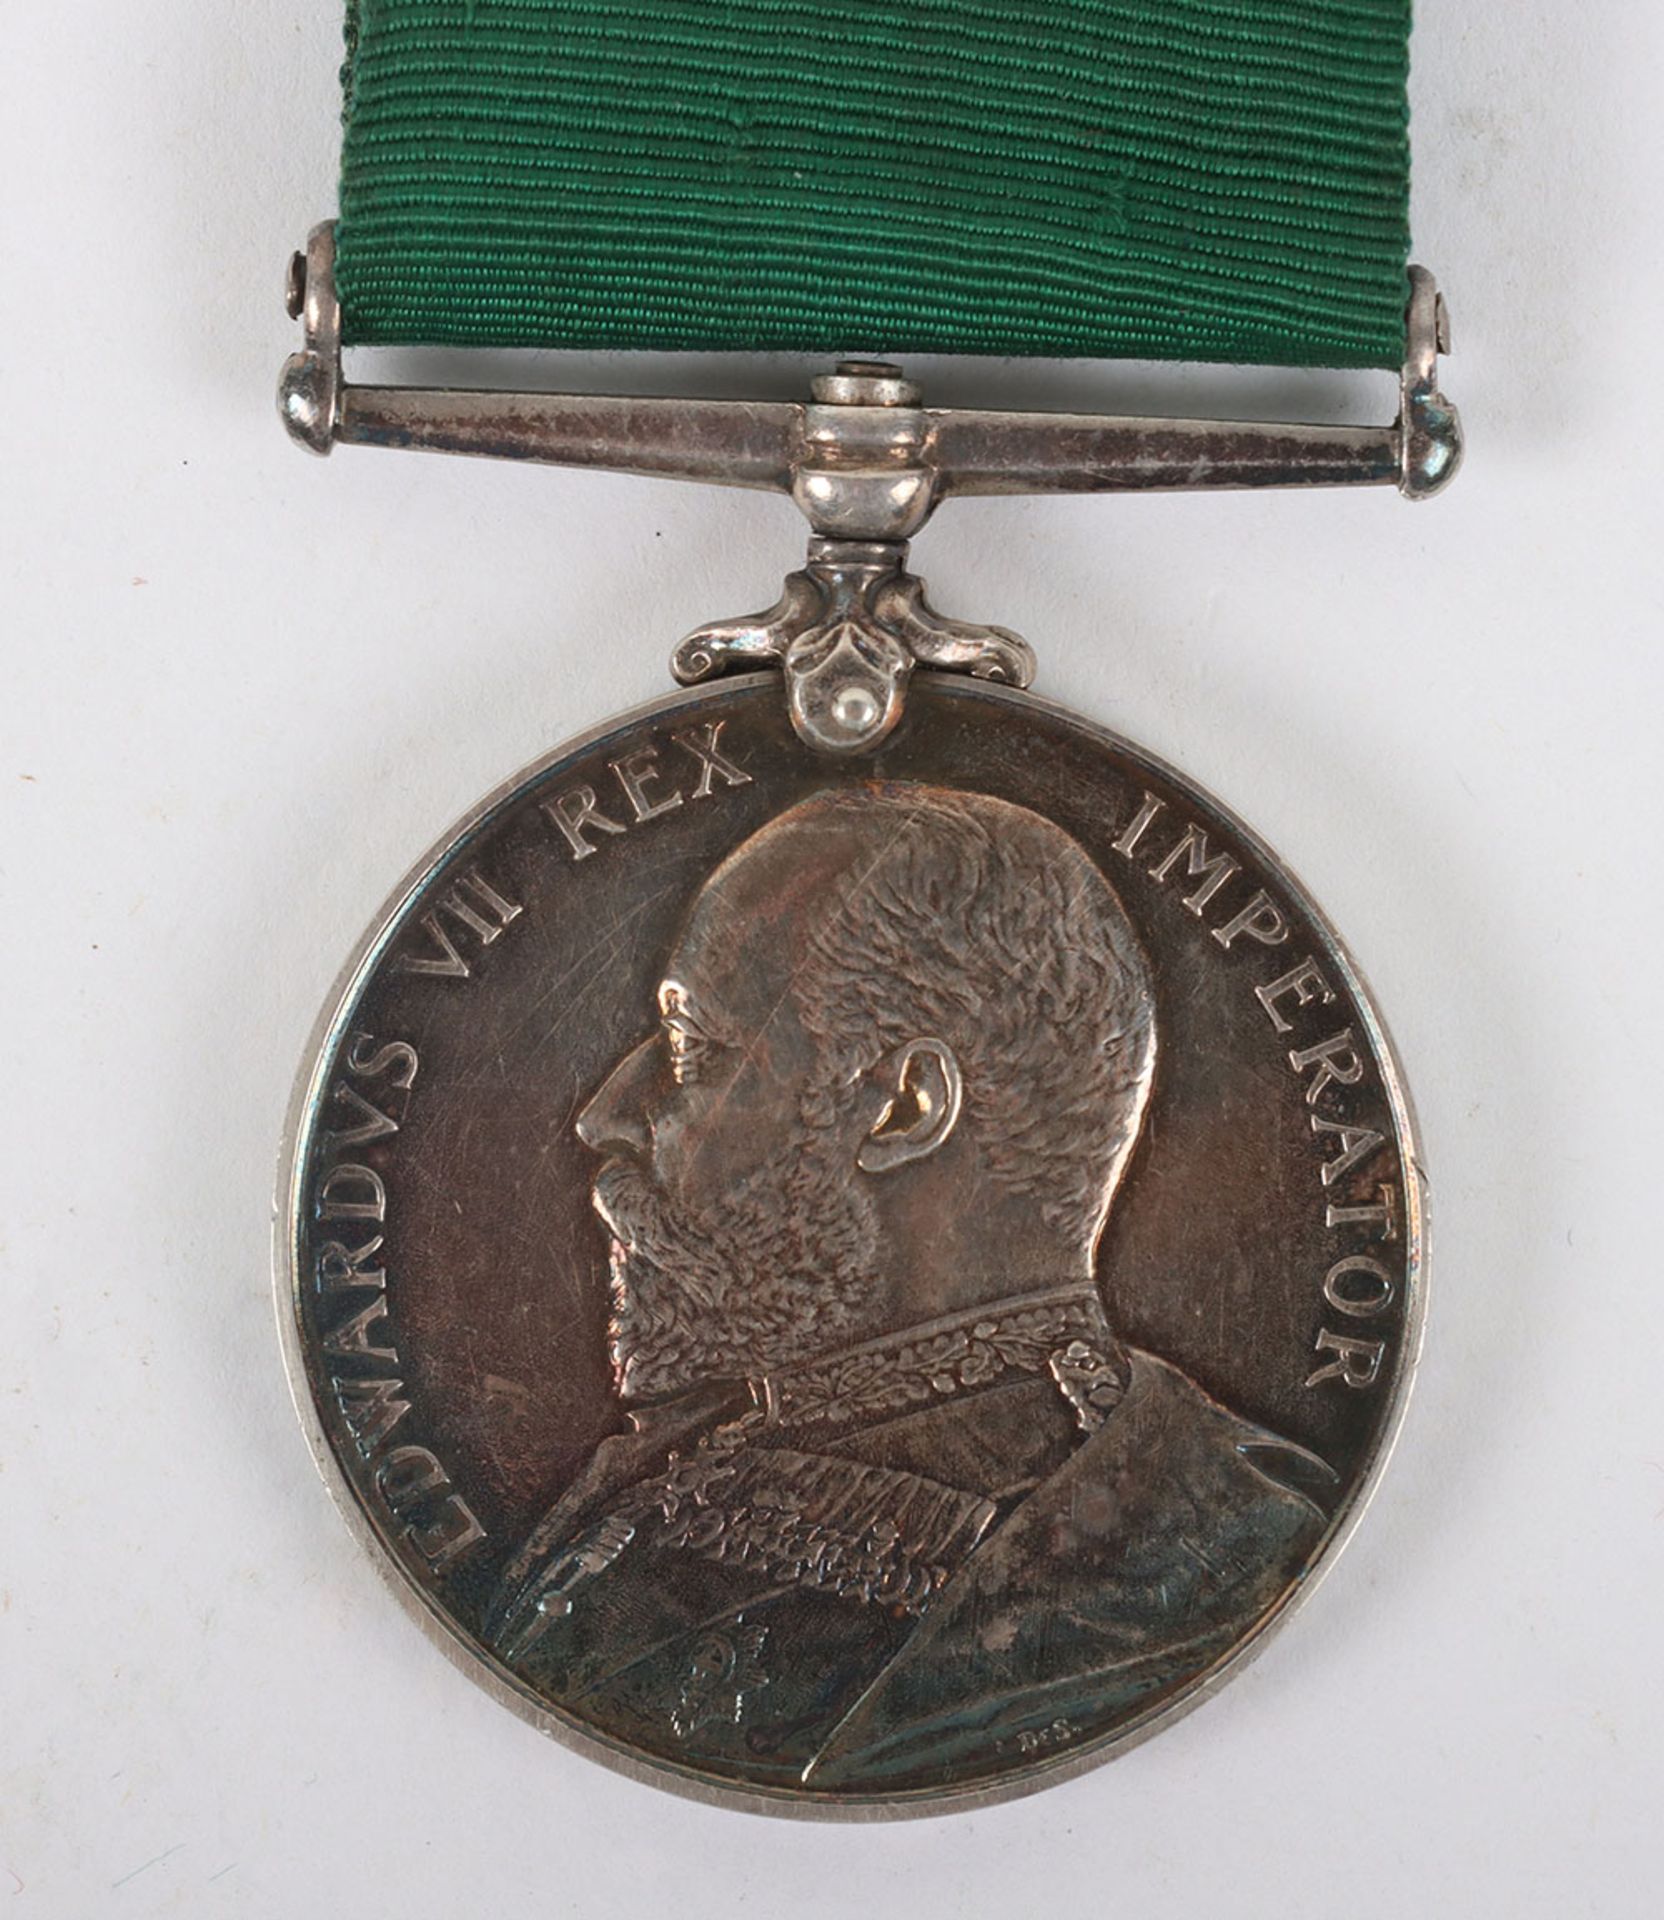 Edwardian Volunteer Long Service Medal to a Colour Sergeant in the Volunteer Battalion of the Hampsh - Image 2 of 5